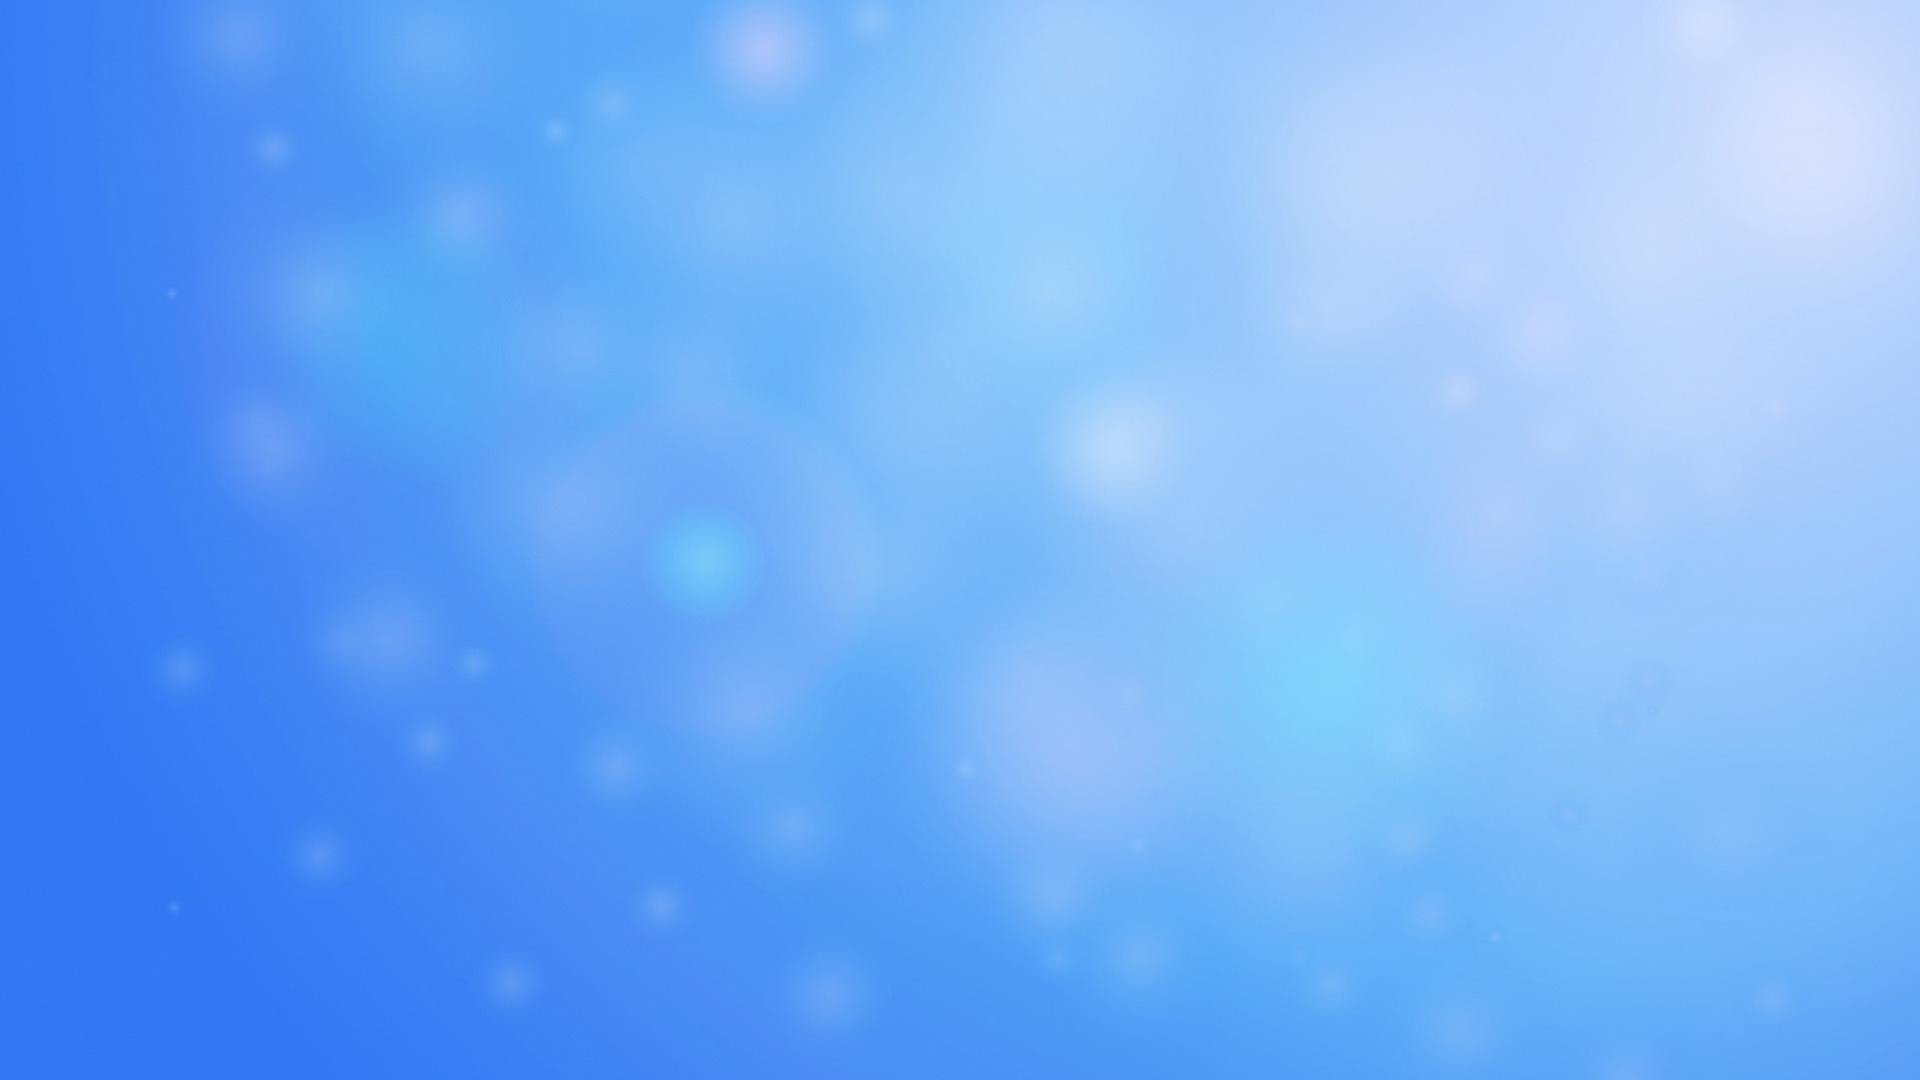 1920x1080  Blue and pink backgrounds for windows 7 wide wallpapers :1280x800,1440x900,1680x1050